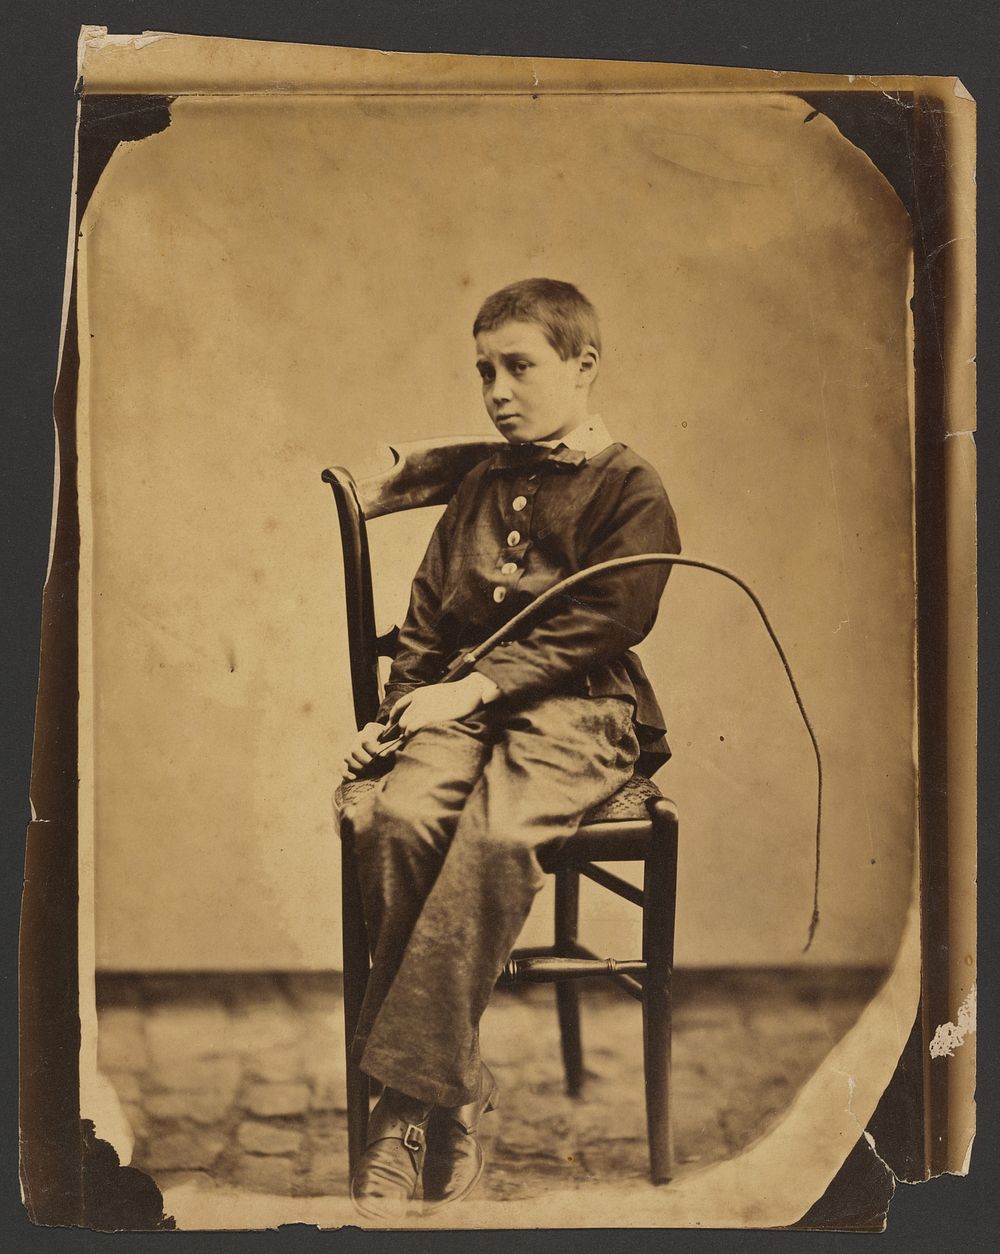 Boy holding a whip